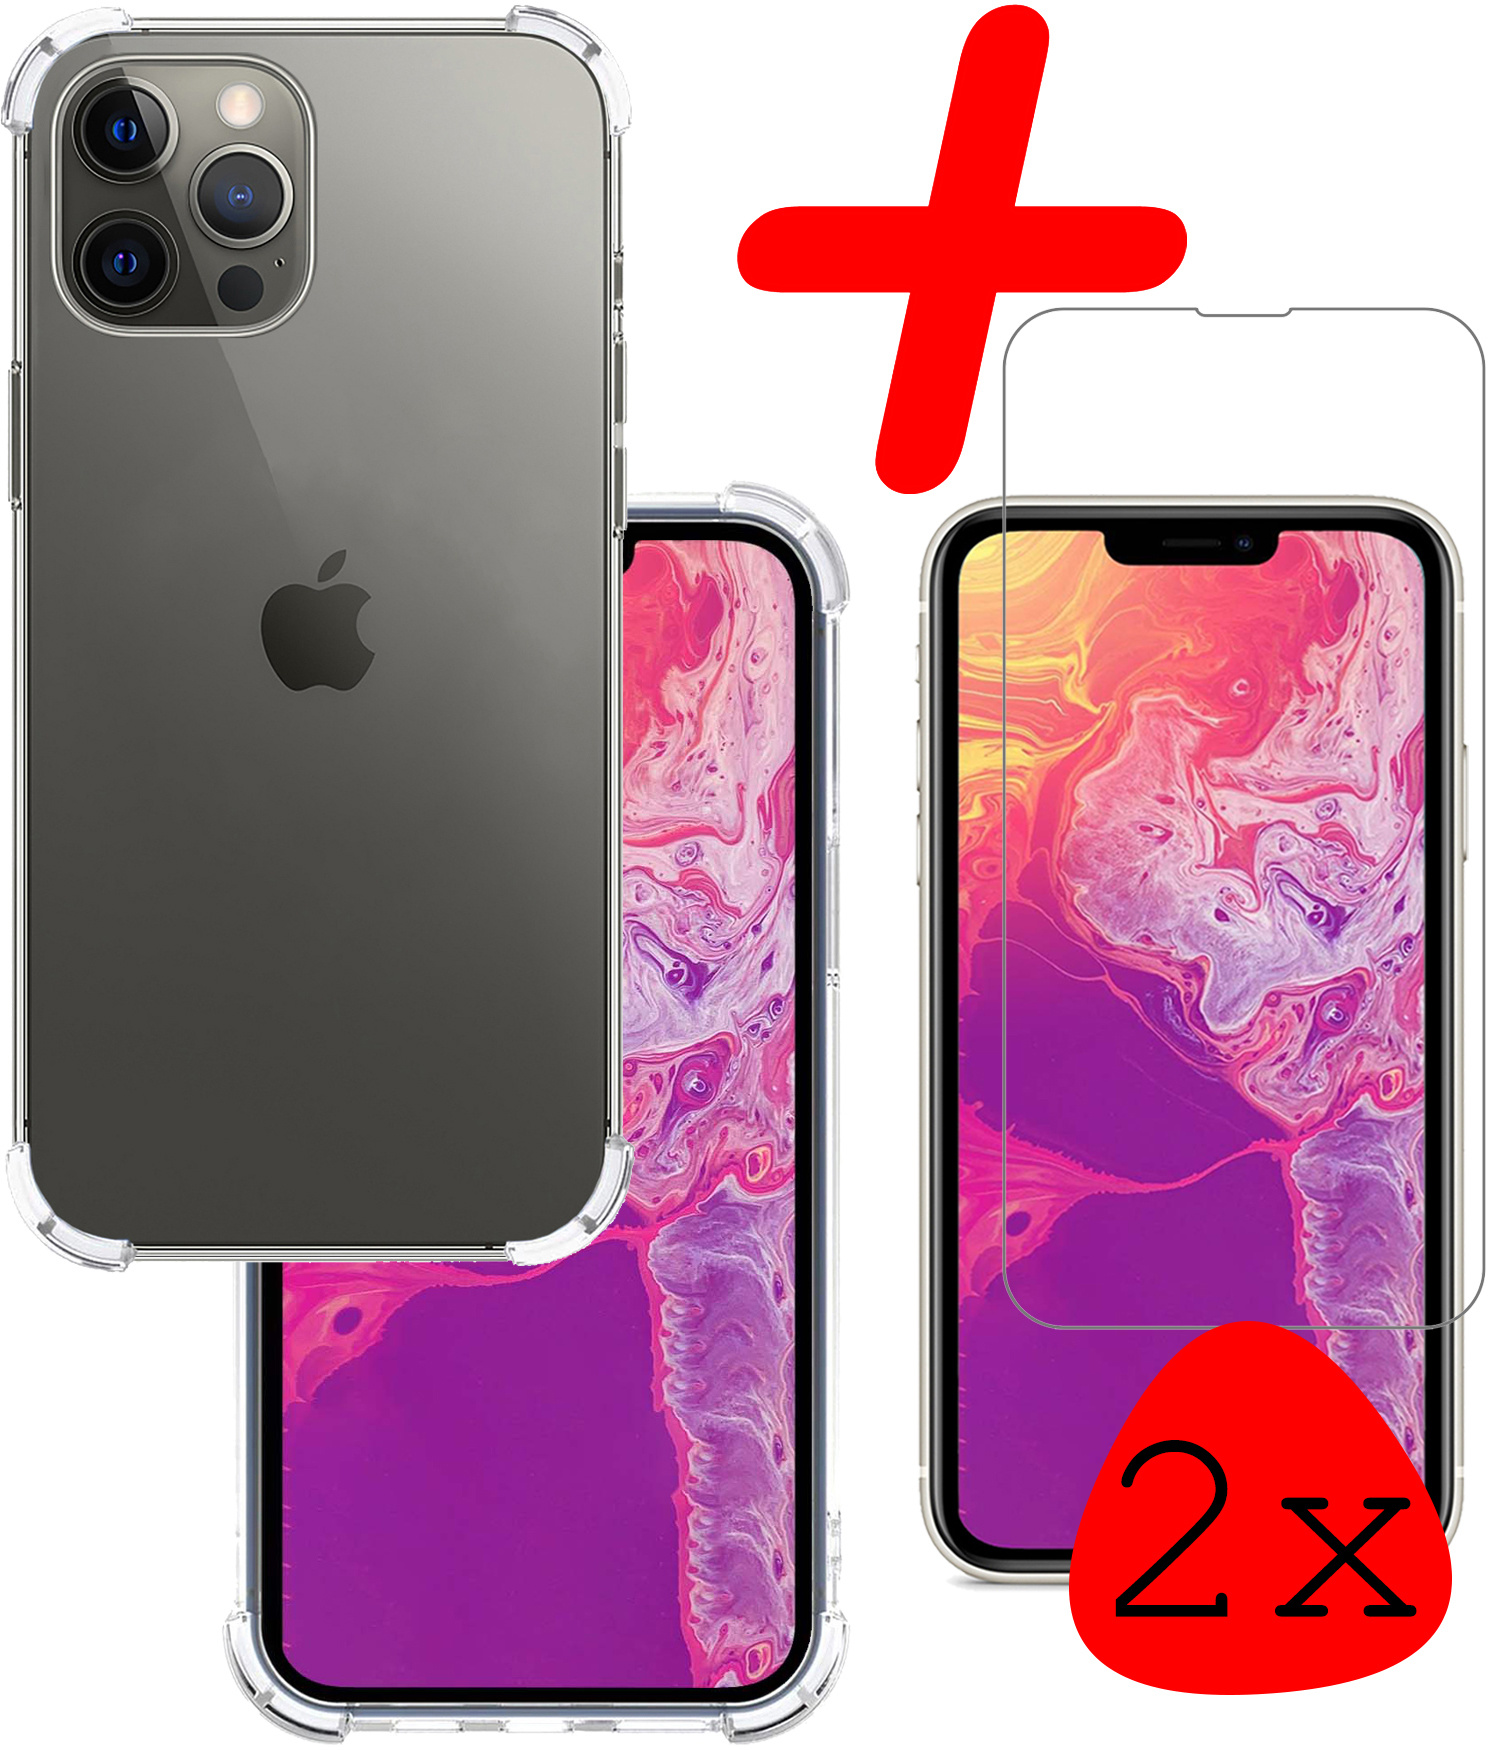 BASEY. iPhone 13 Pro Hoesje Shock Proof Met 2x Screenprotector Tempered Glass - iPhone 13 Pro Screen Protector Beschermglas Full Screen Hoes Shockproof - Transparant